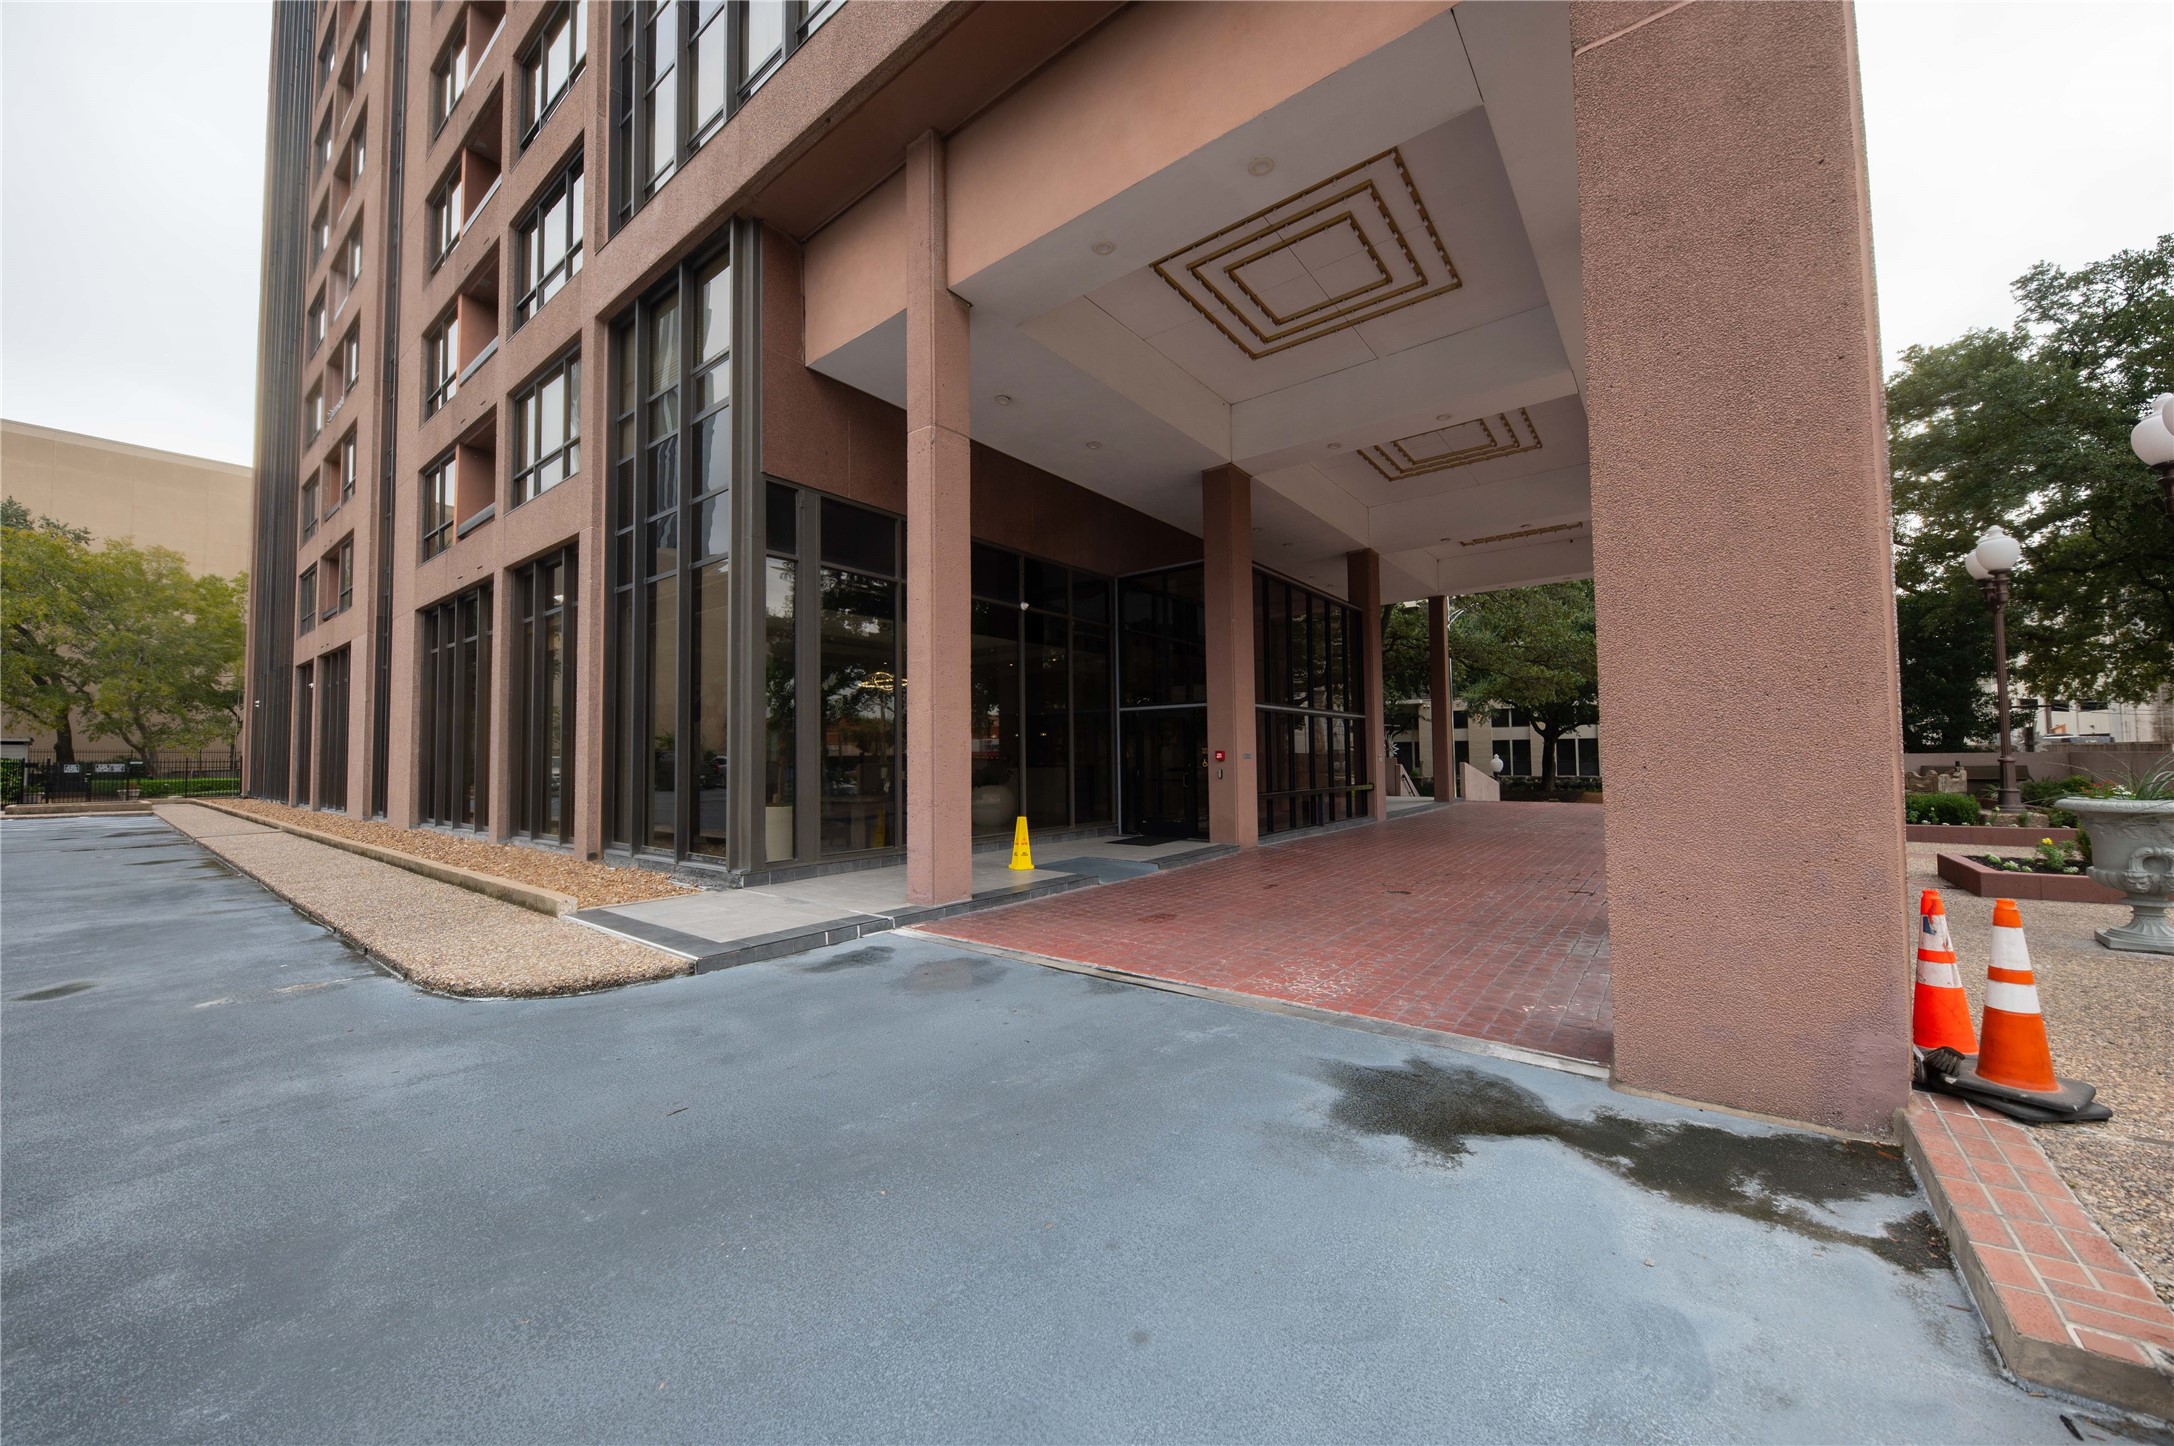 This beautiful building is within walking distance of shopping and restaurants. You are in the heart of the Galleria and within easy distance to Midtown.